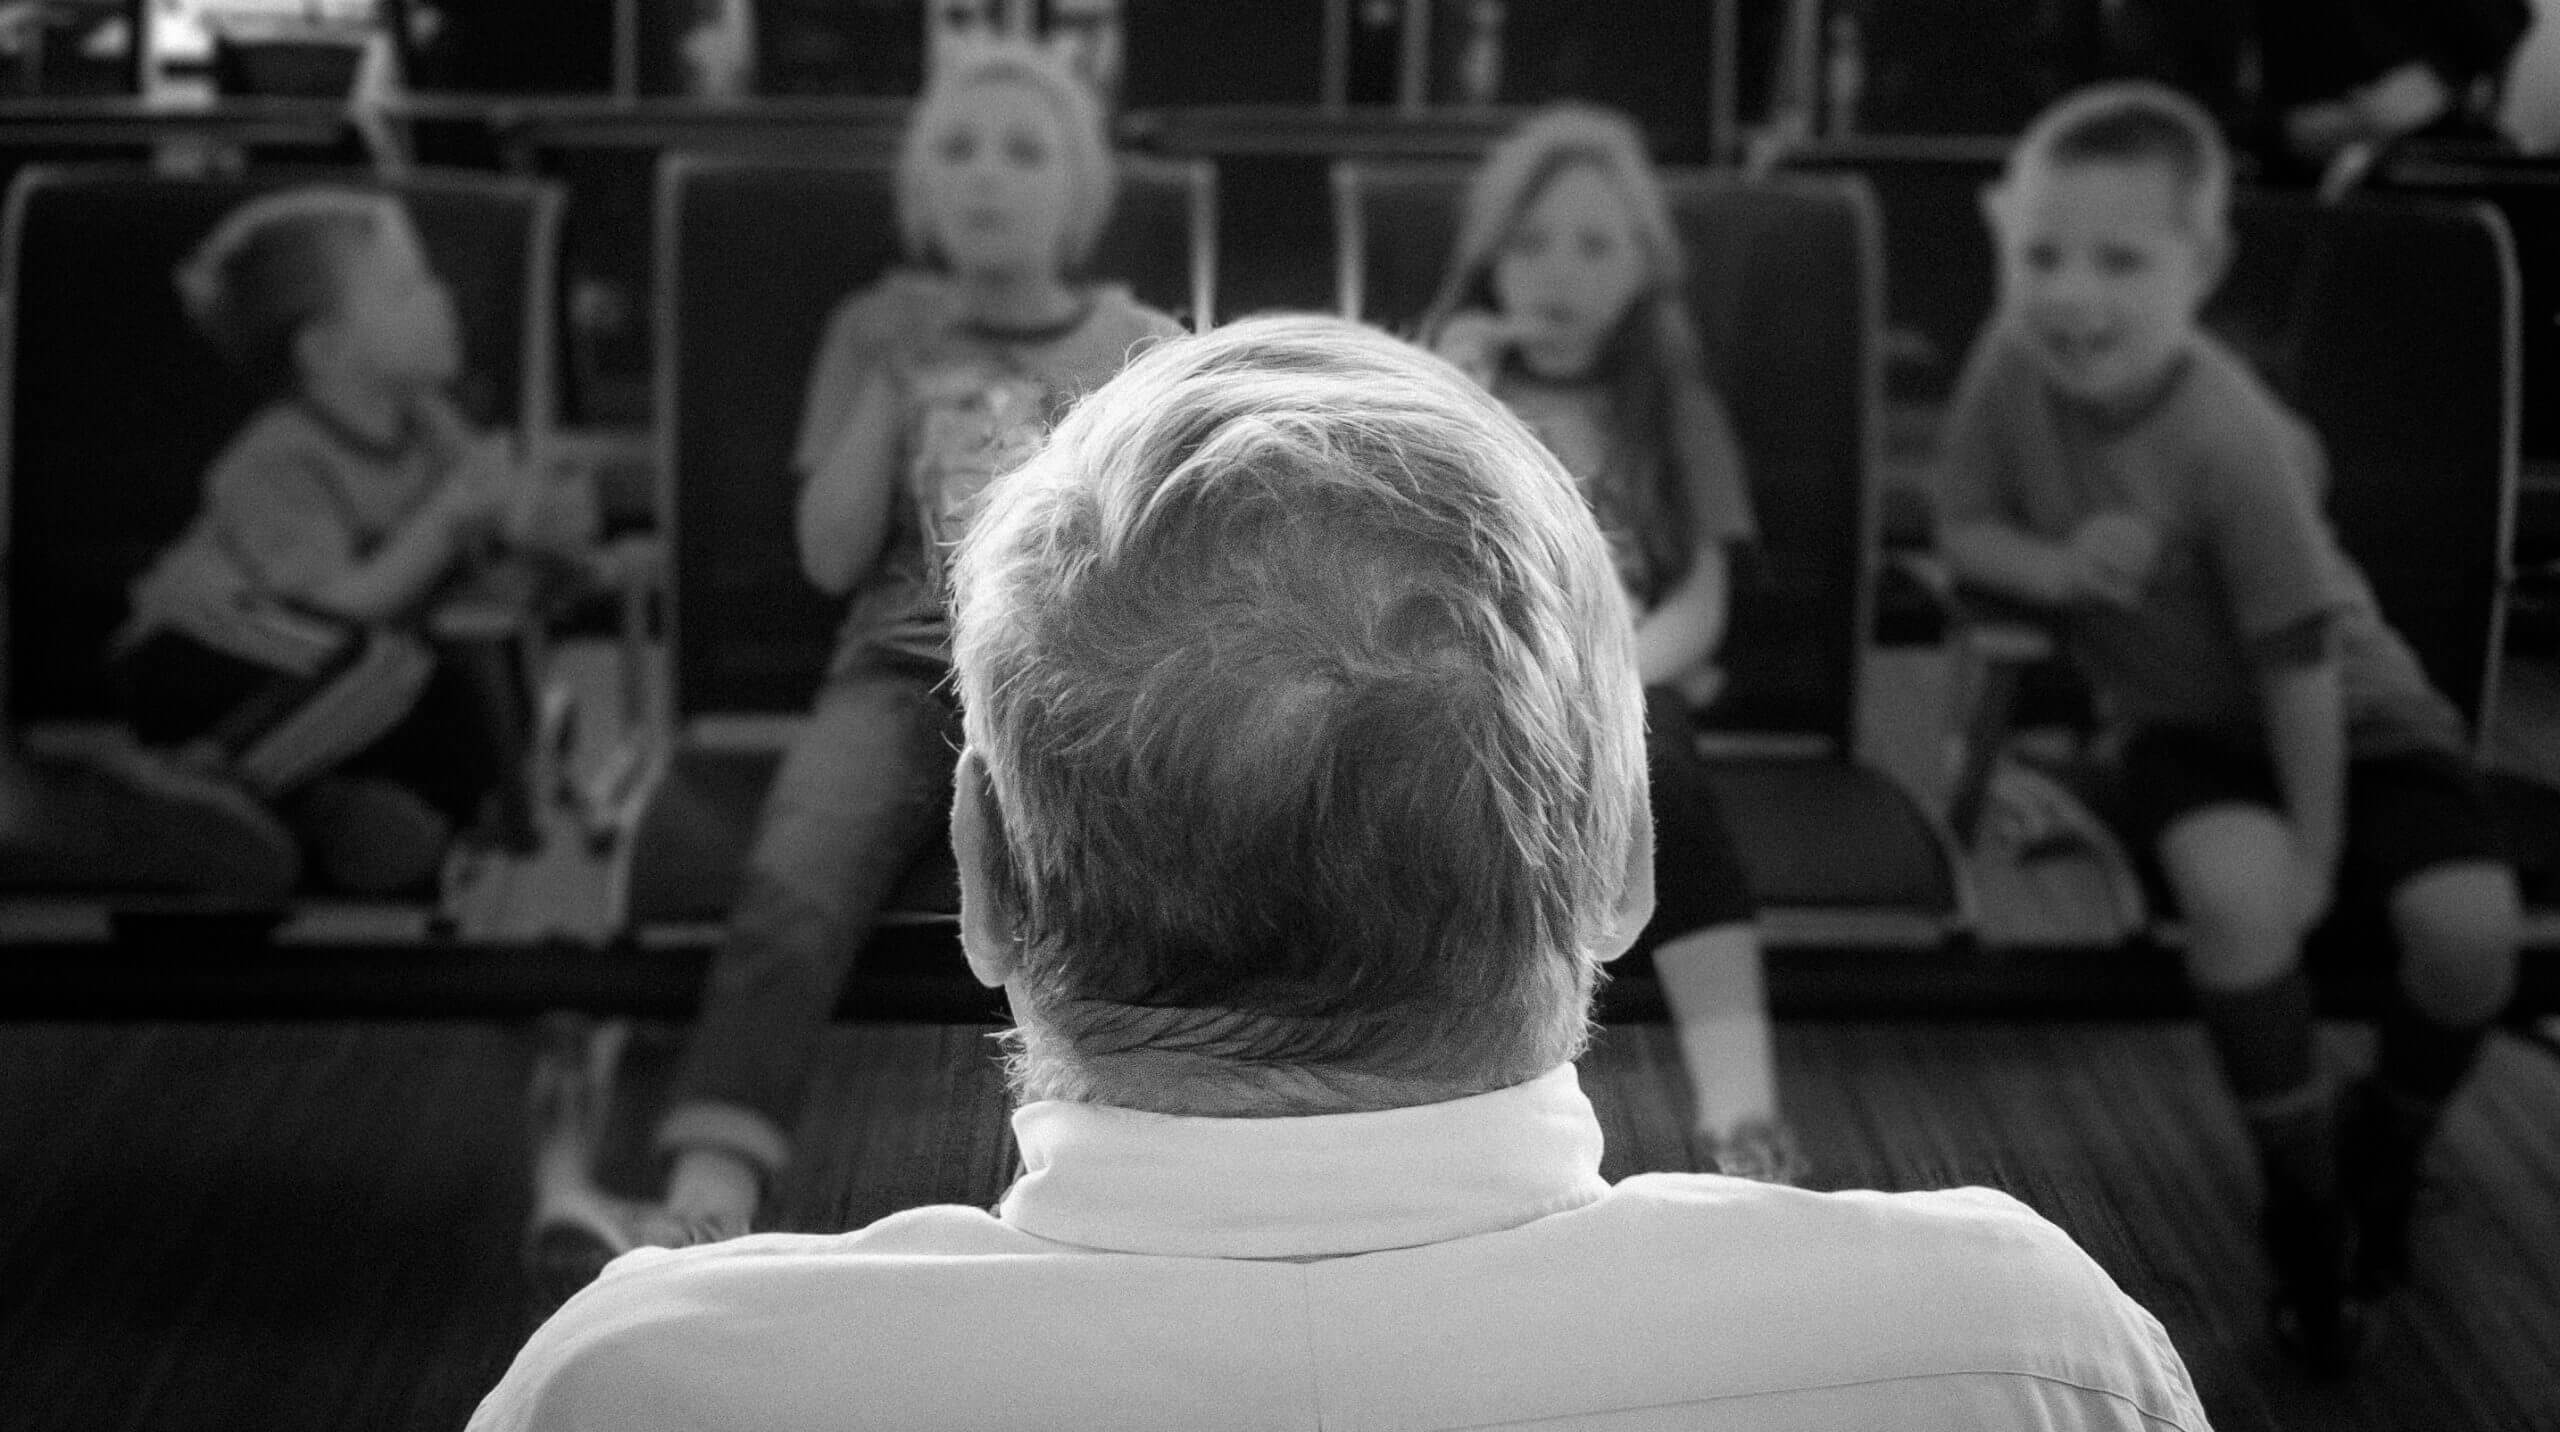 A focused view of the back of a man's head. The man looks forward to an unfocused view of four children seated in a theater.